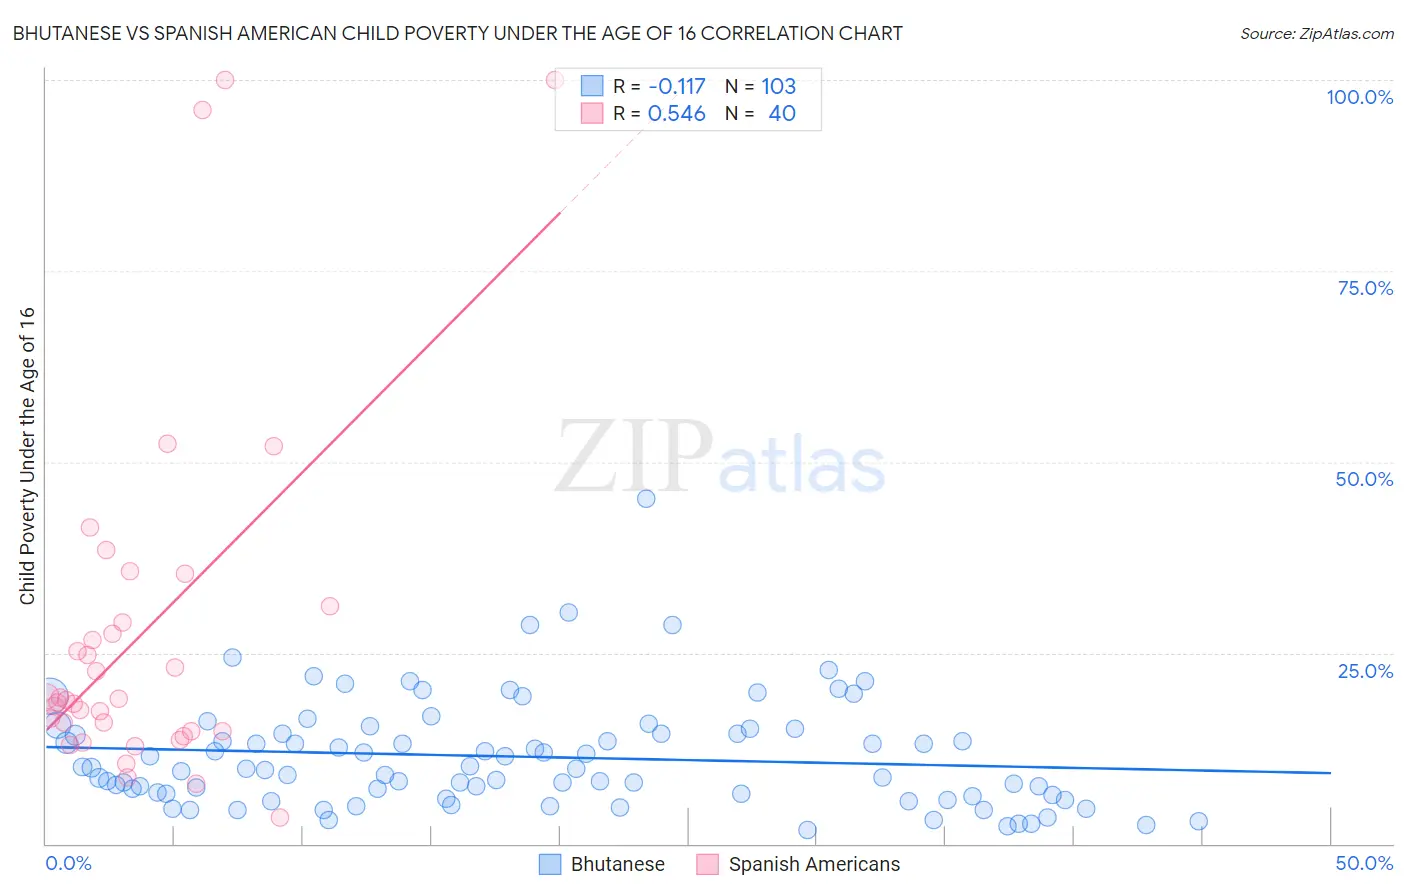 Bhutanese vs Spanish American Child Poverty Under the Age of 16